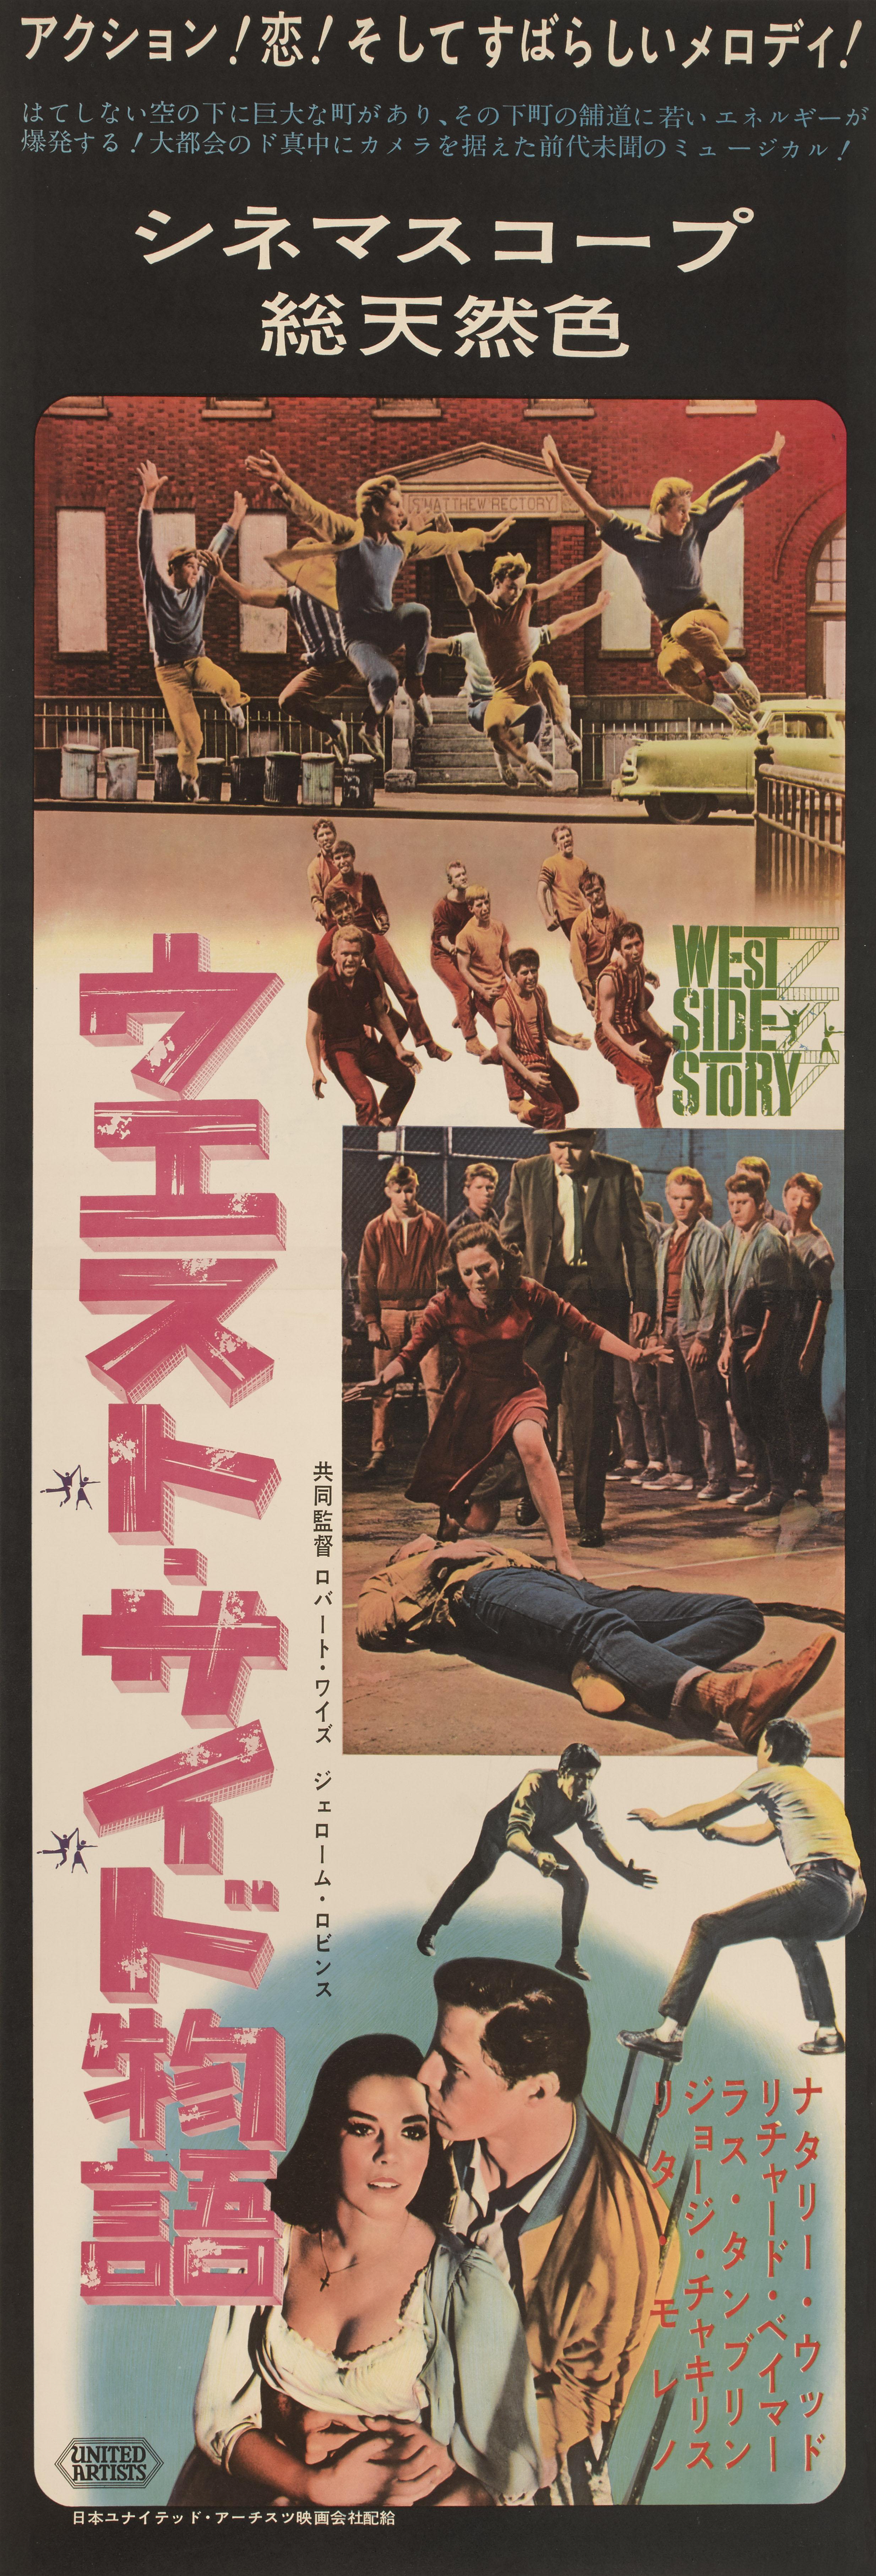 Original Japanese film poster for West Side Story 1961.
The film was directed by Jerome Robbins and Rober Wise and starred Natalie Wood, Richar Beymer, and George Chakiris. The artwork on this poster is unique to the Japanese release of the